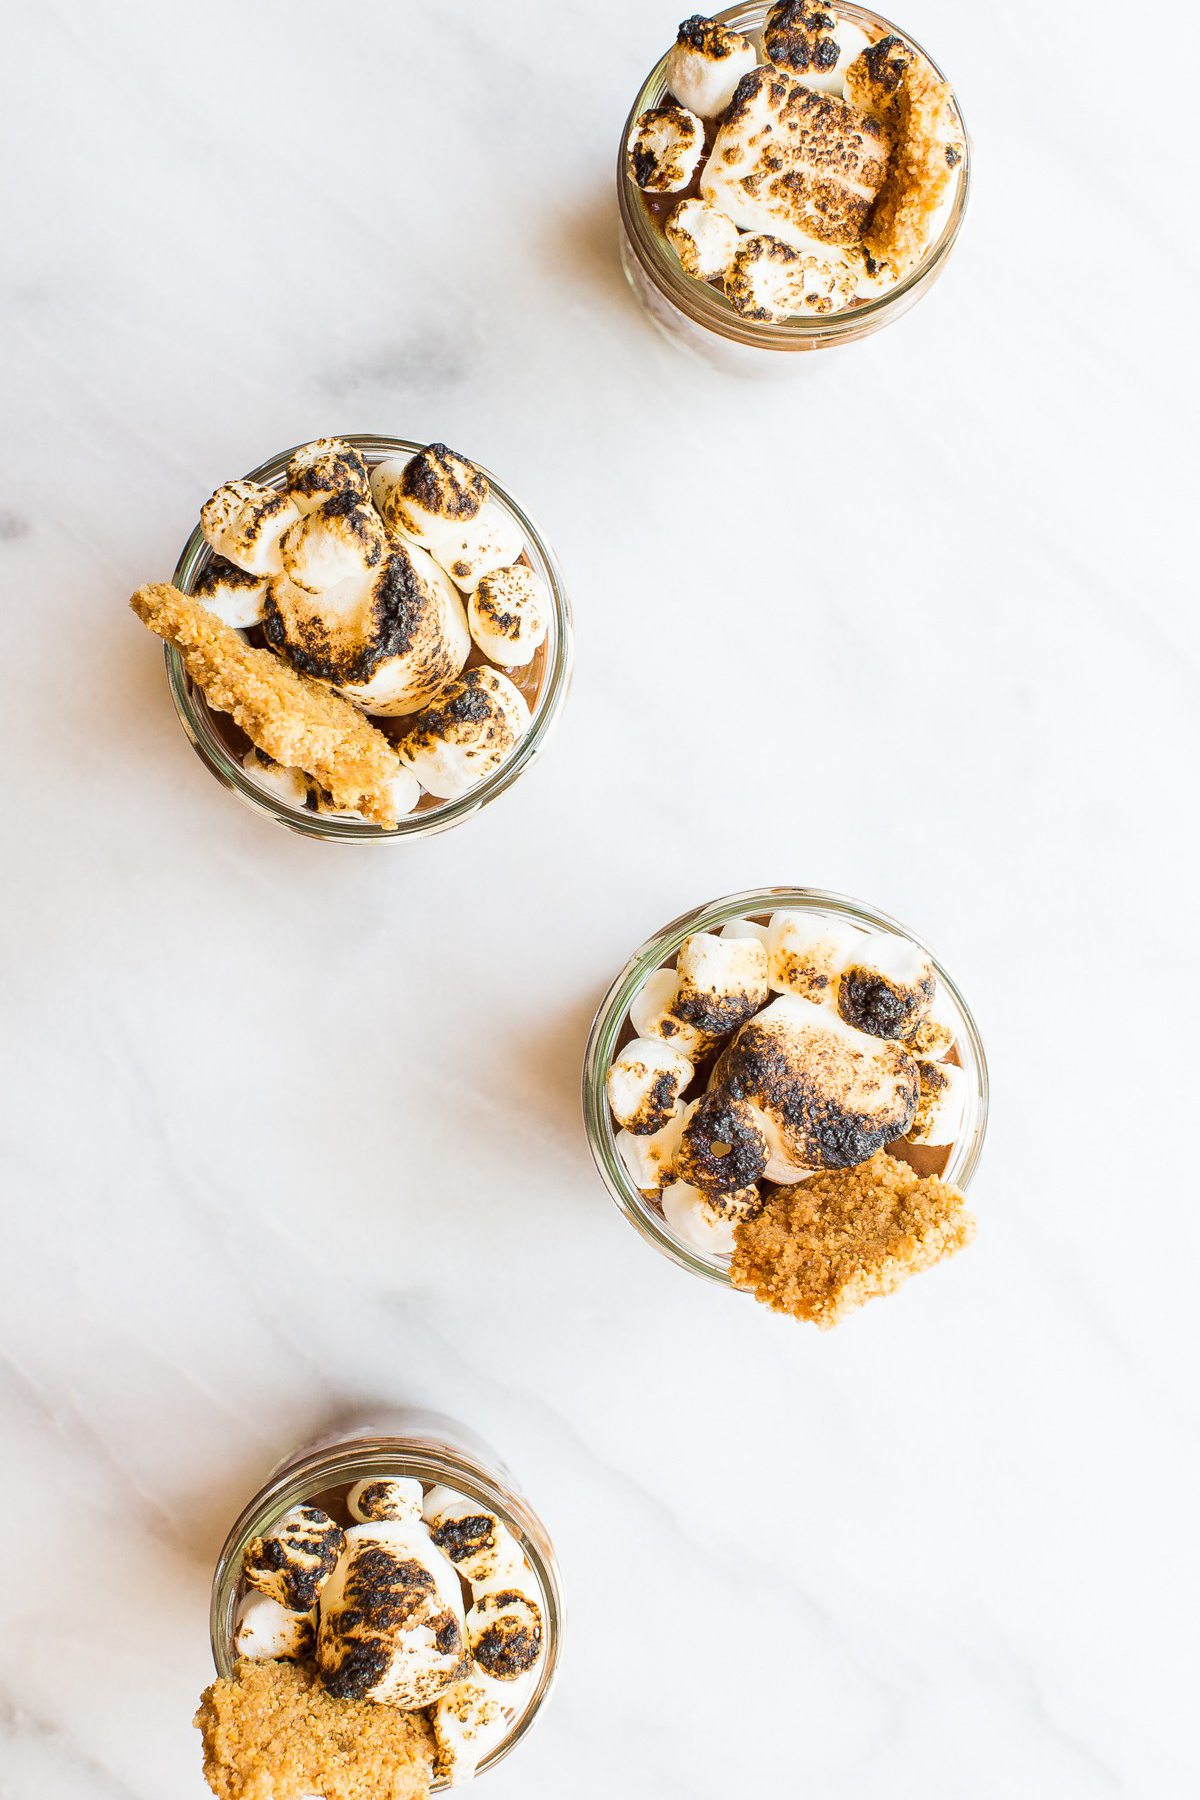 S'mores in glass jars